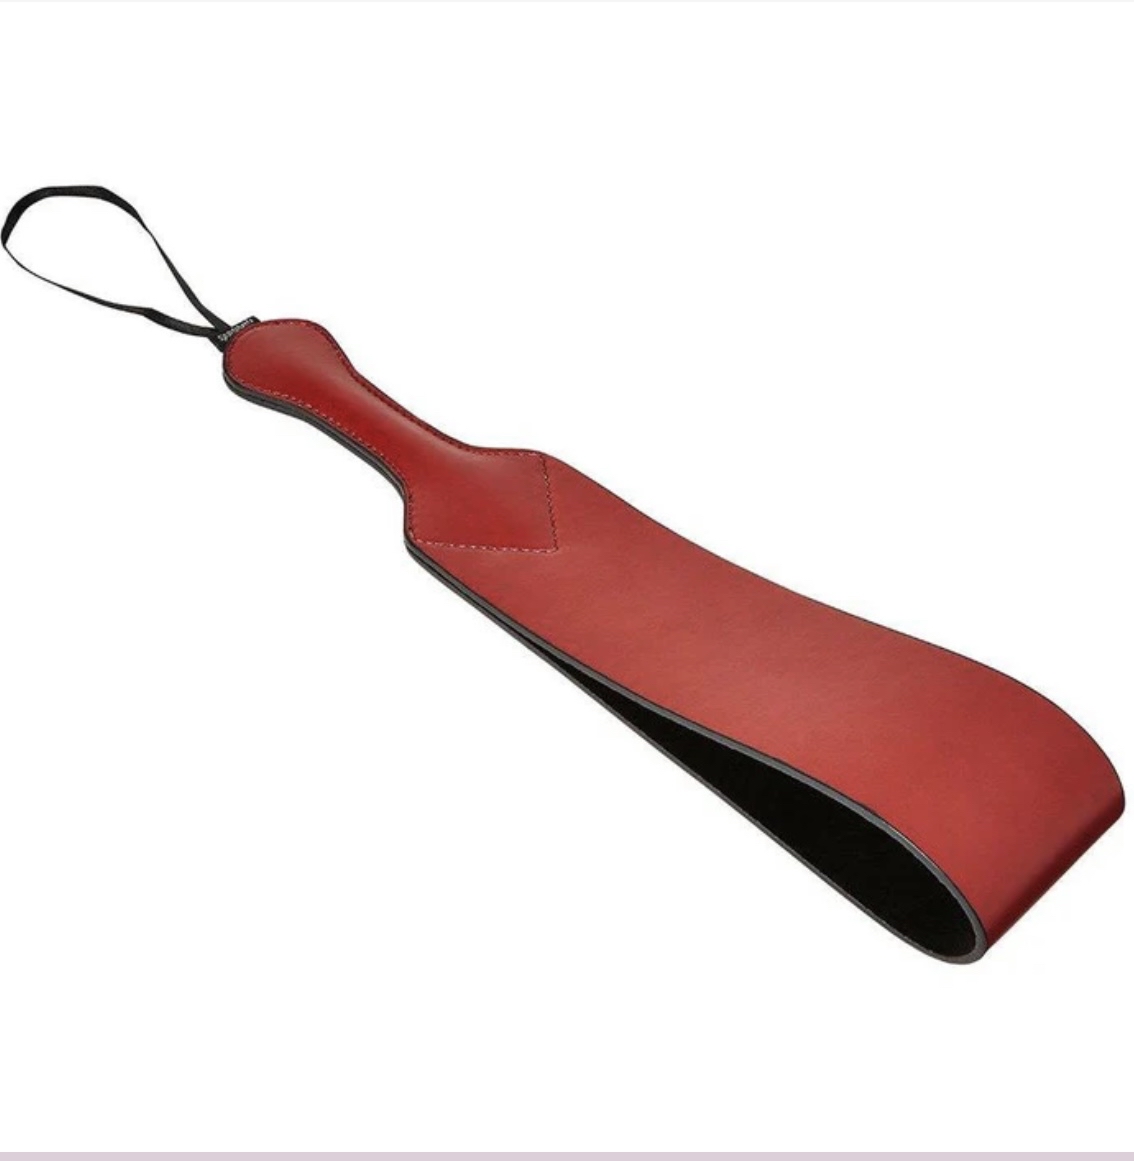 Large Leather Paddle – Adult Sex Toys, Intimate Supplies, Sexual